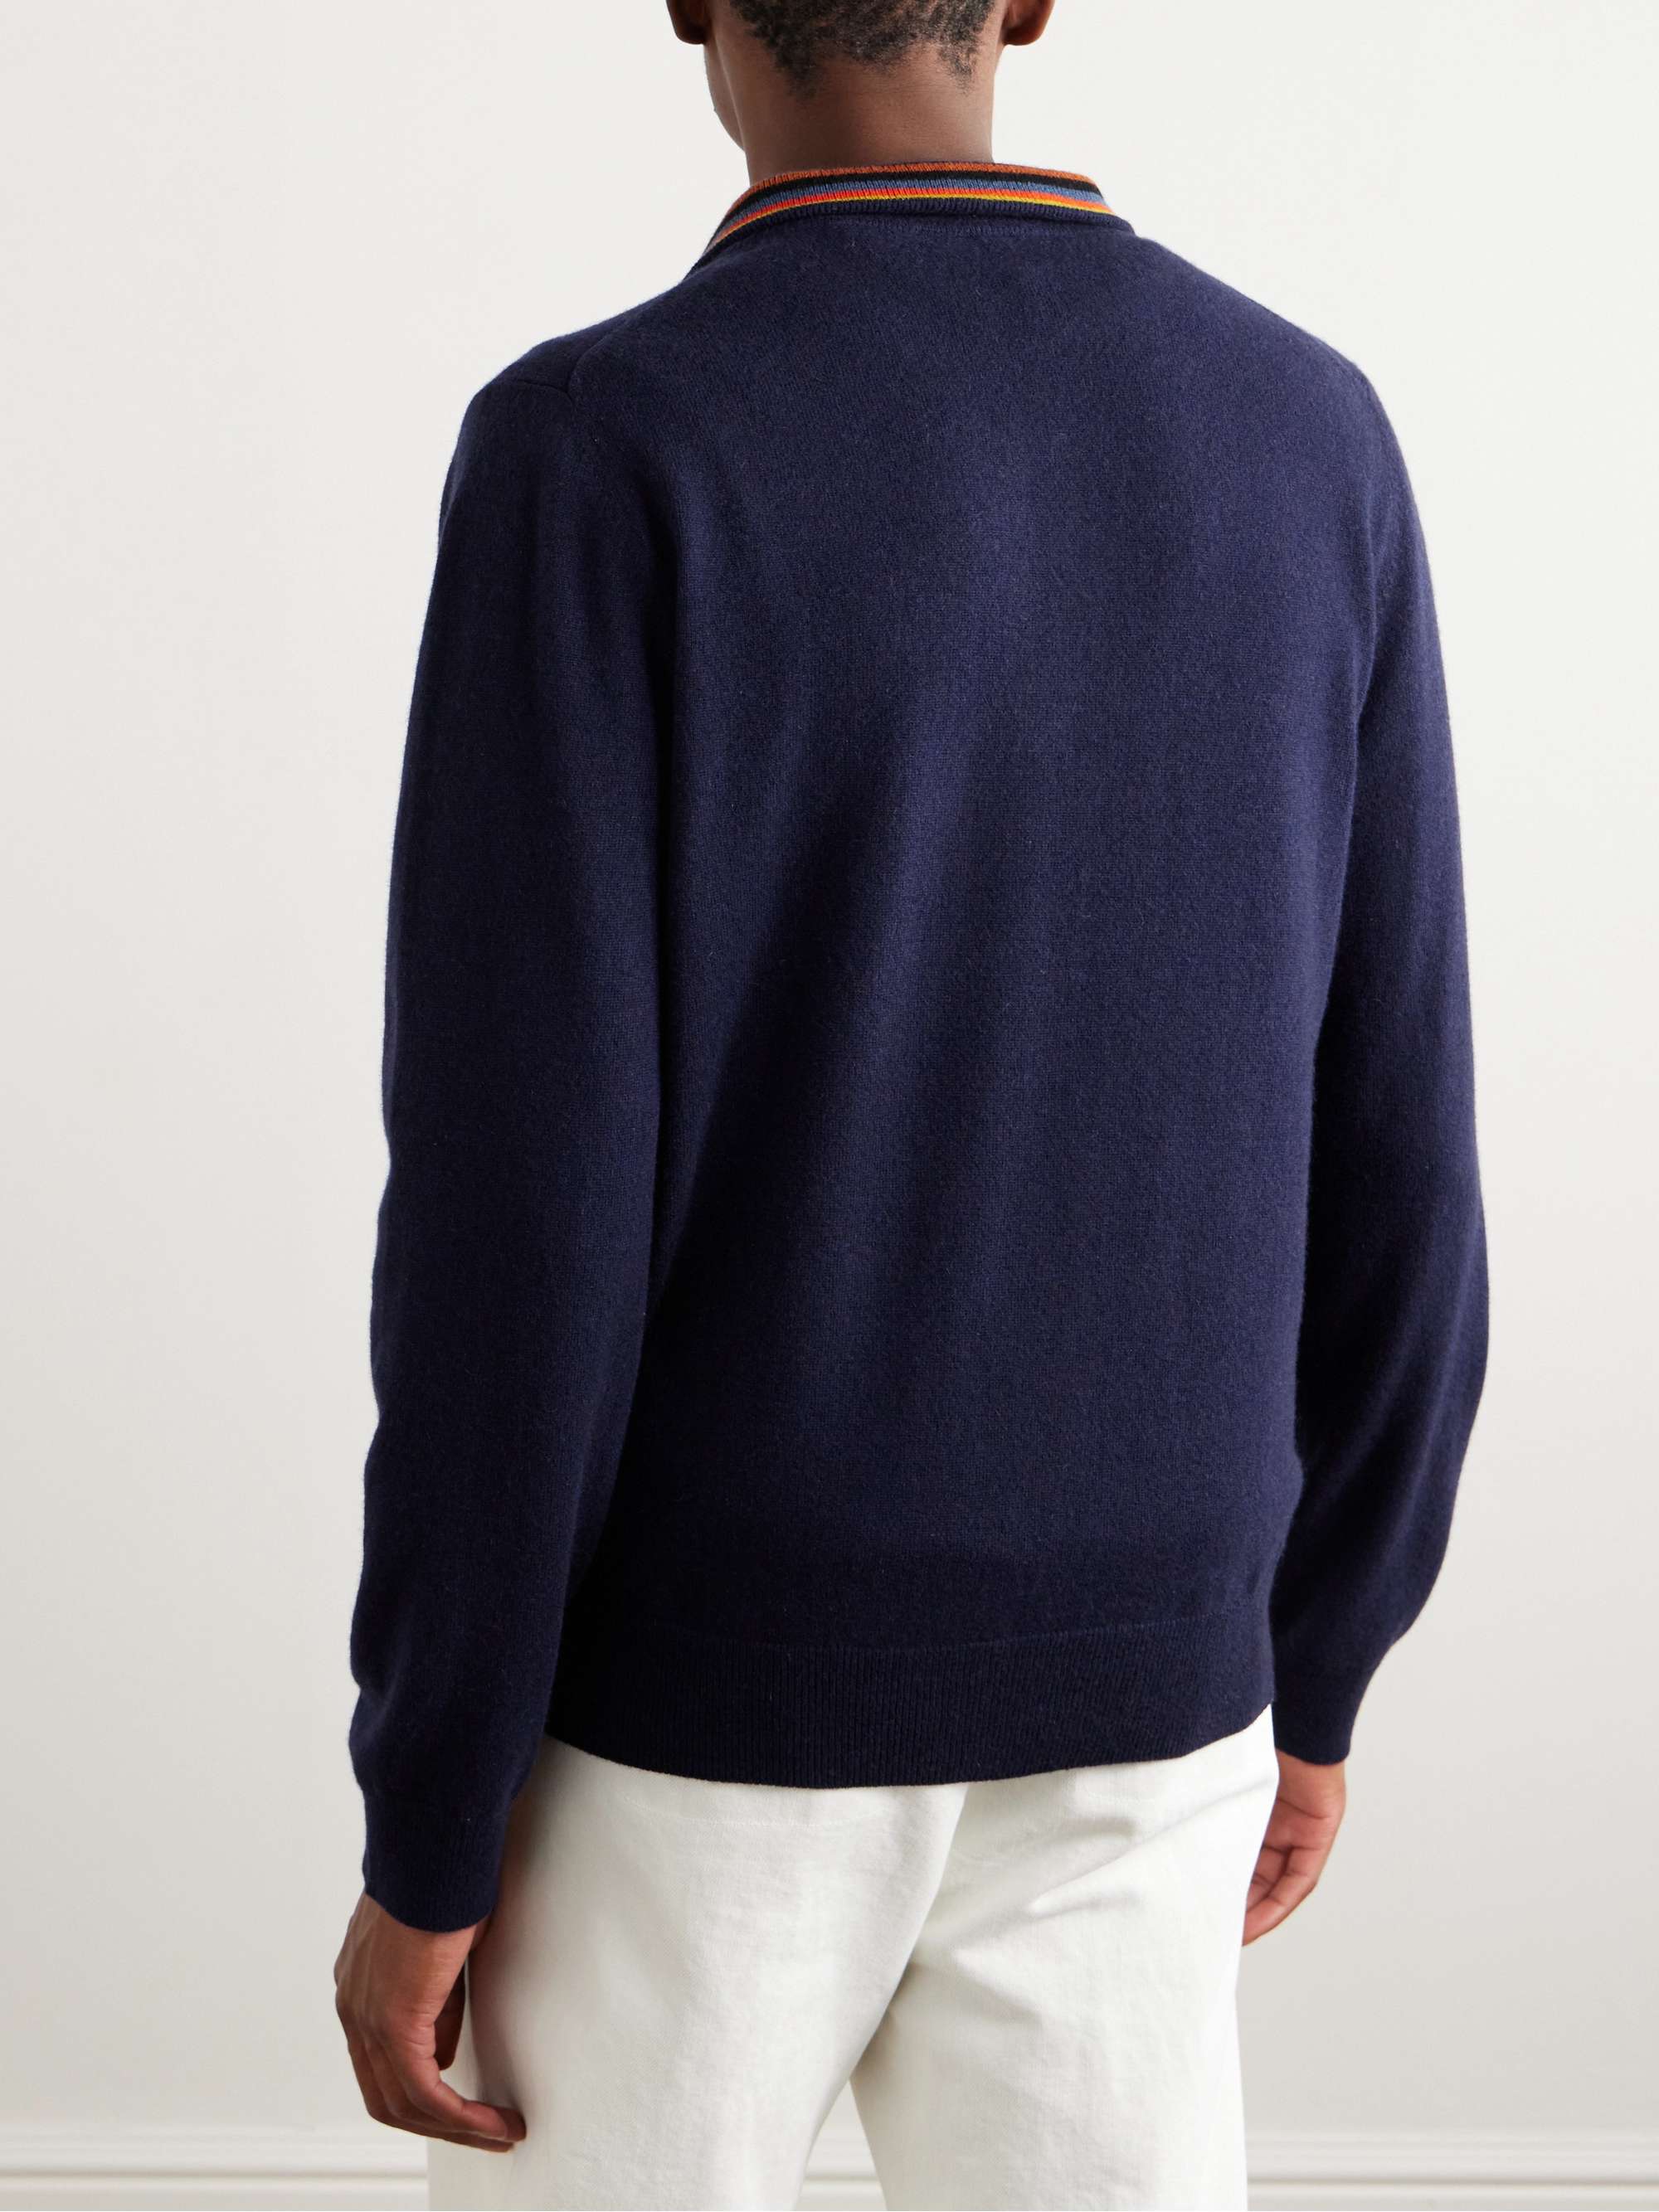 PAUL SMITH Striped Ribbed Cashmere Half-Zip Sweater for Men | MR PORTER